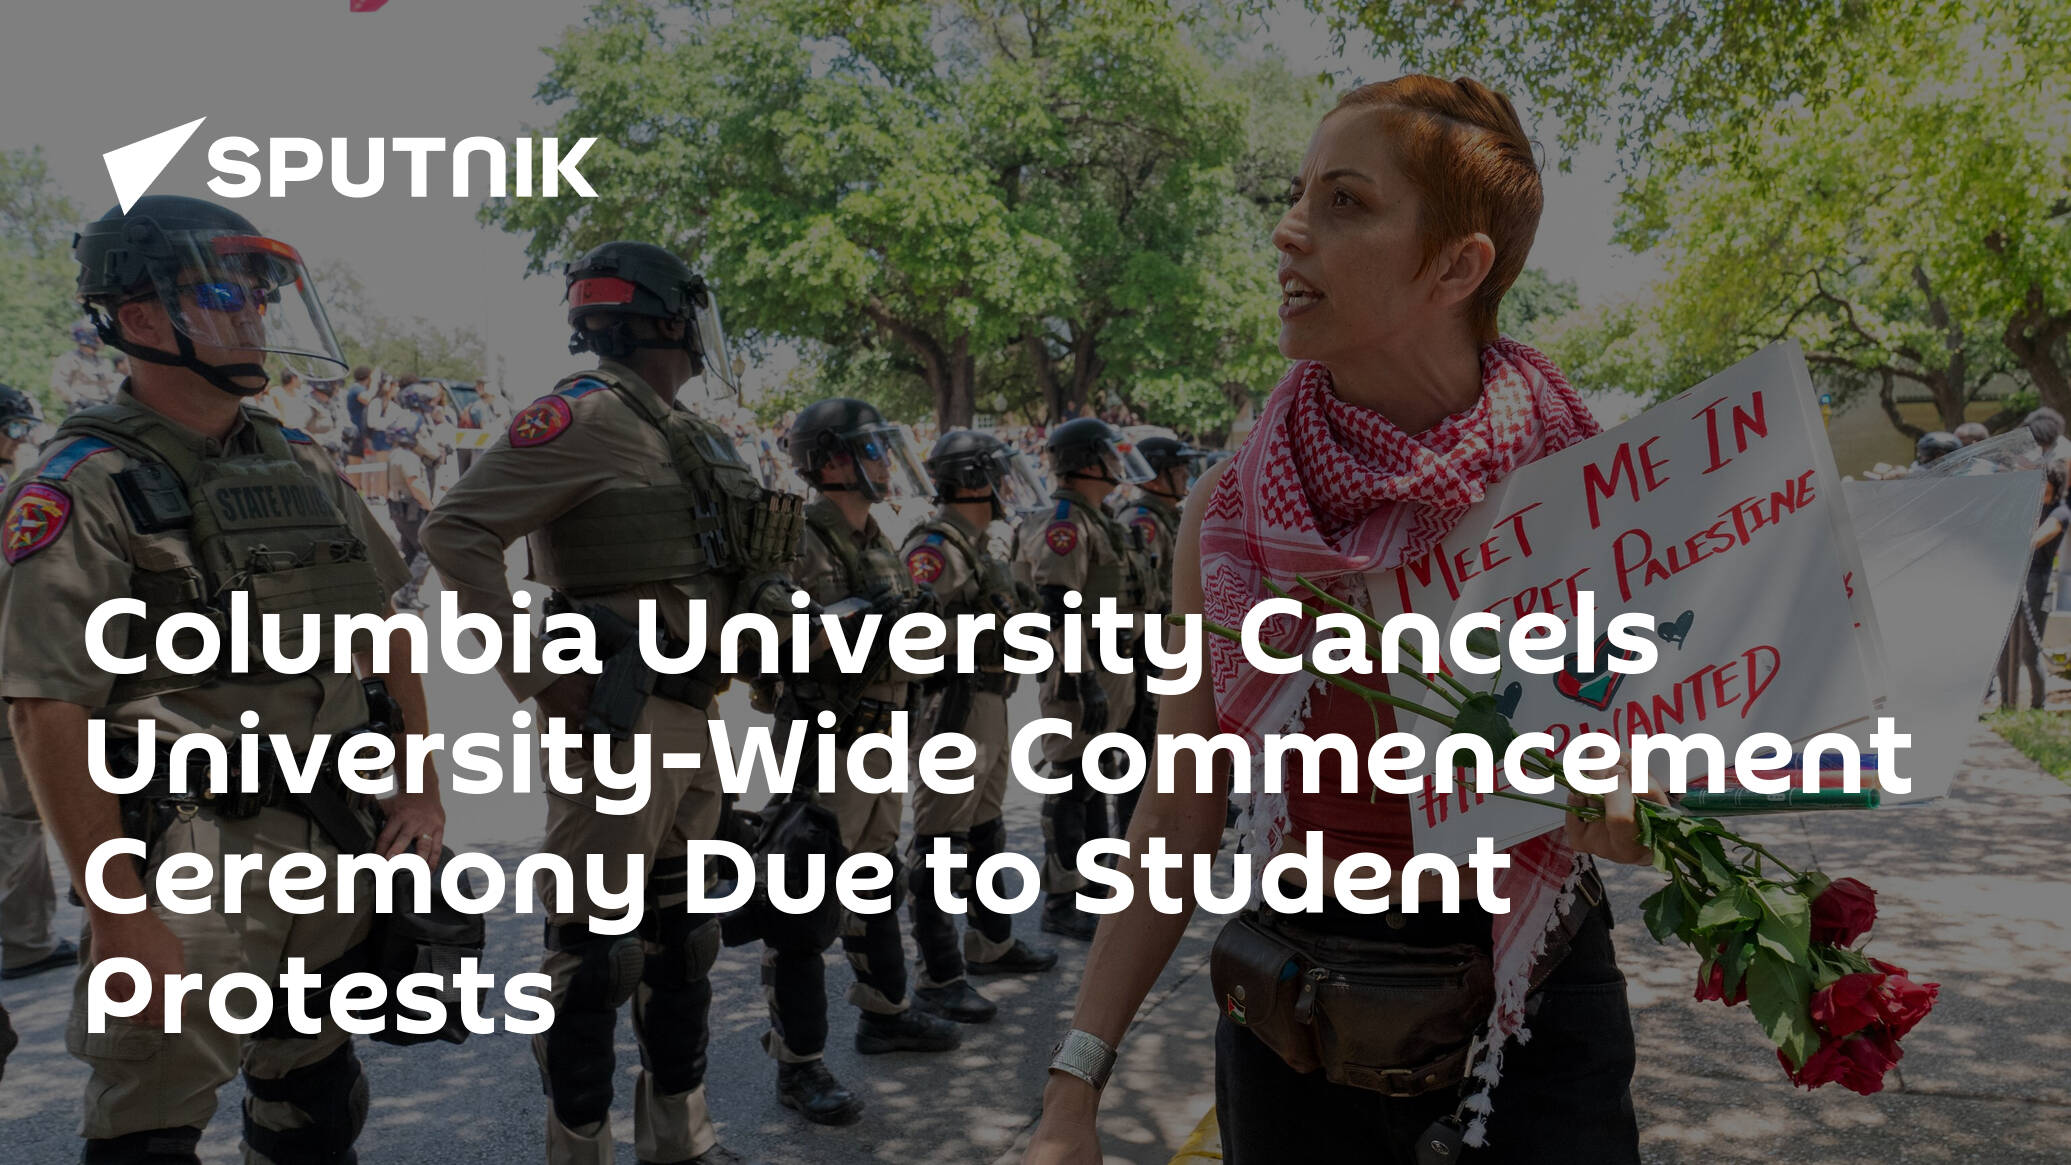 Columbia University Cancels University-Wide Commencement Ceremony Due to Student Protests